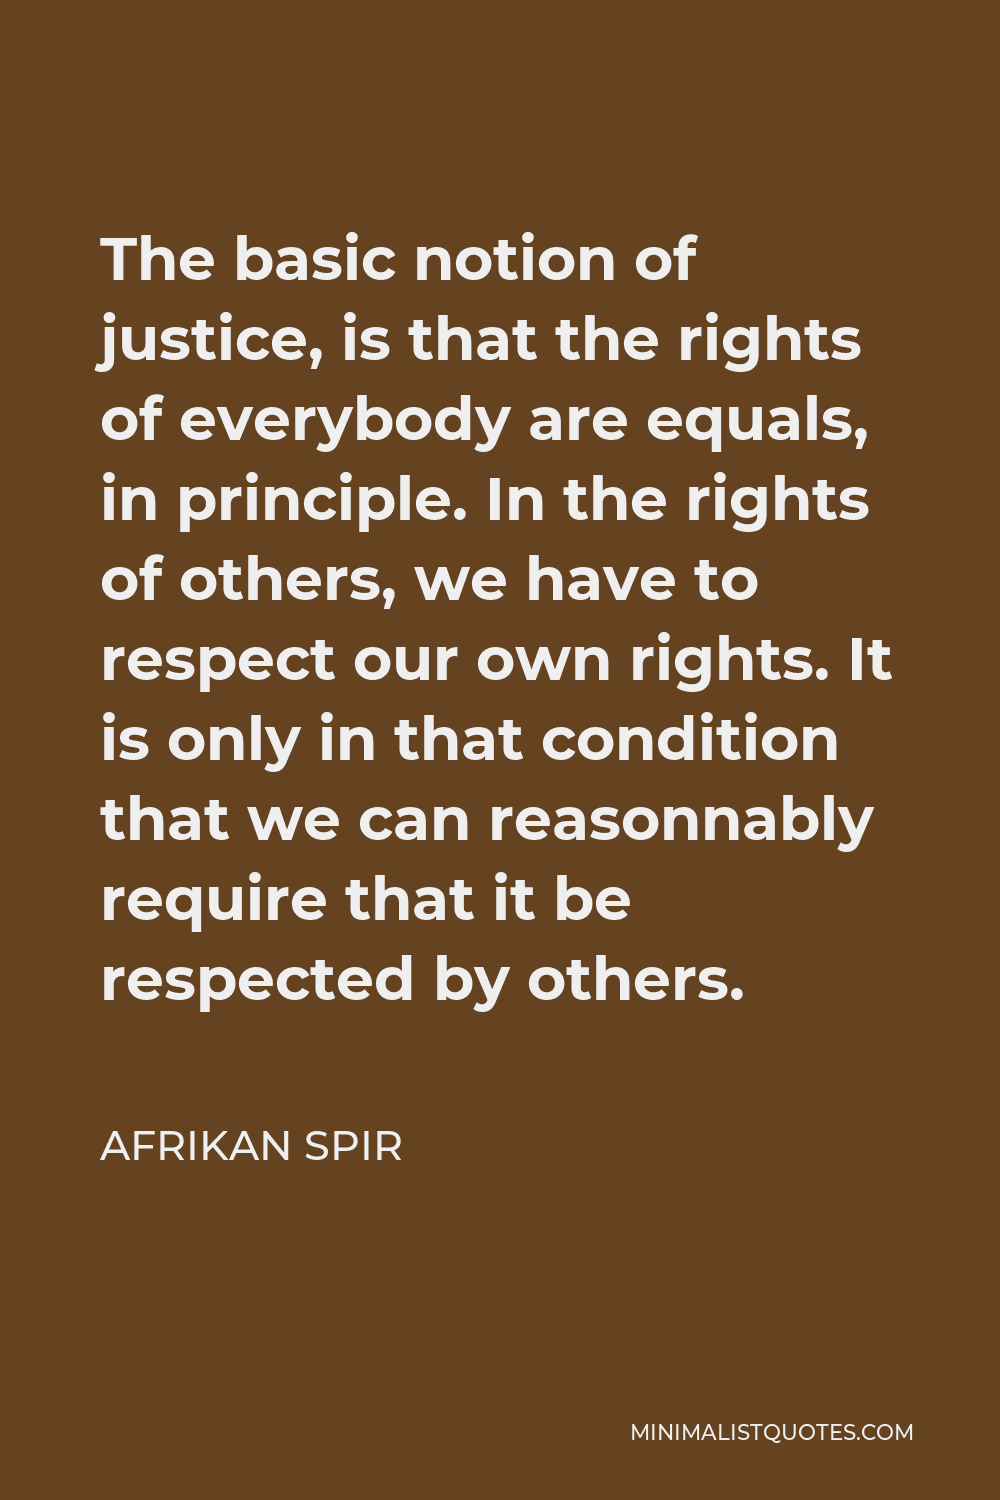 Afrikan Spir Quote - The basic notion of justice, is that the rights of everybody are equals, in principle. In the rights of others, we have to respect our own rights. It is only in that condition that we can reasonnably require that it be respected by others.